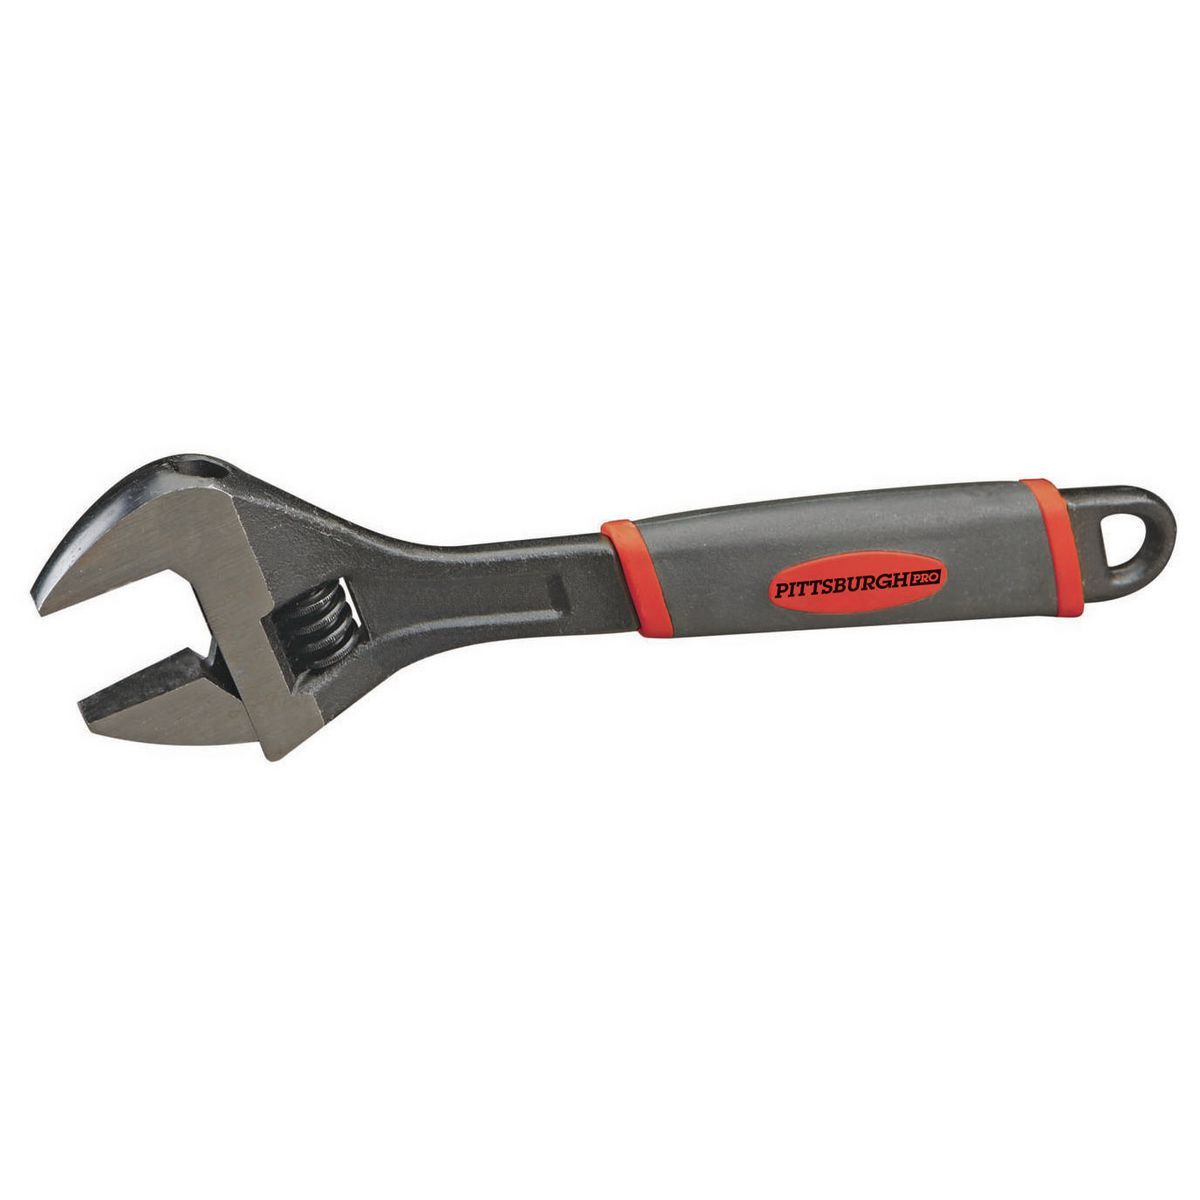 PITTSBURGH PRO 12 in. Adjustable Wrench